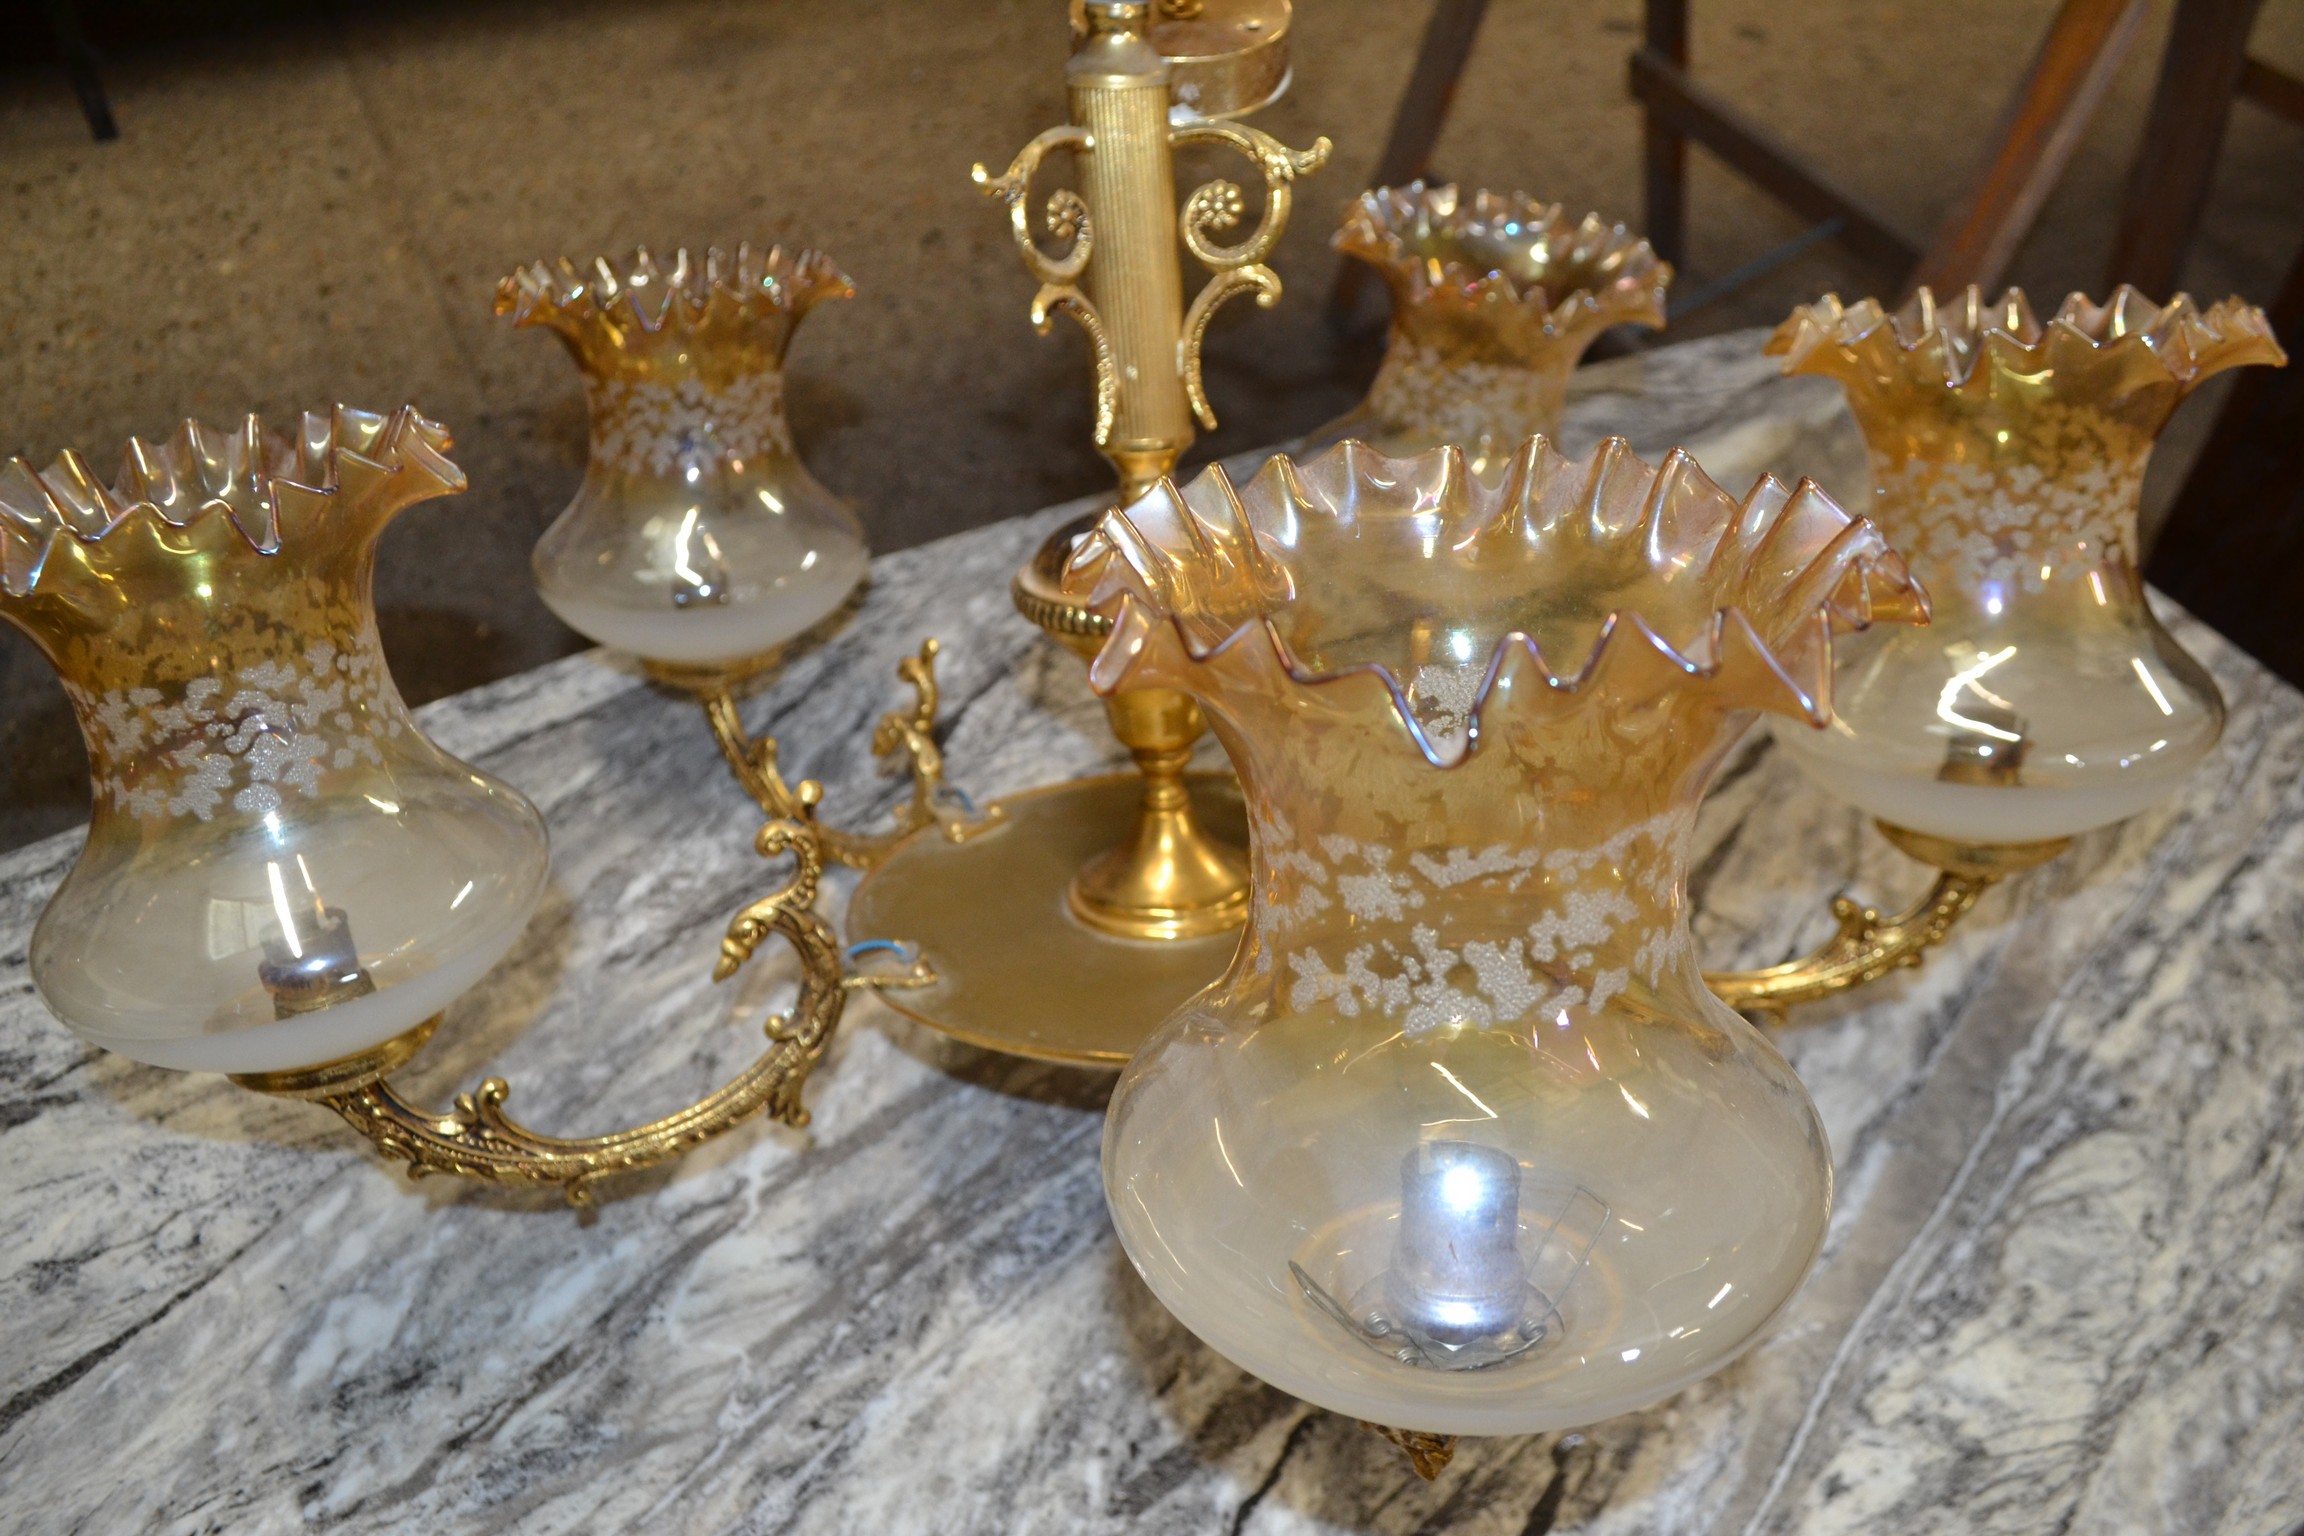 20TH CENTURY FIVE LIGHT CENTRE CEILING LIGHT FITTING WITH GILT METAL FRAME AND FRILLED GLASS SHADES - Image 2 of 2